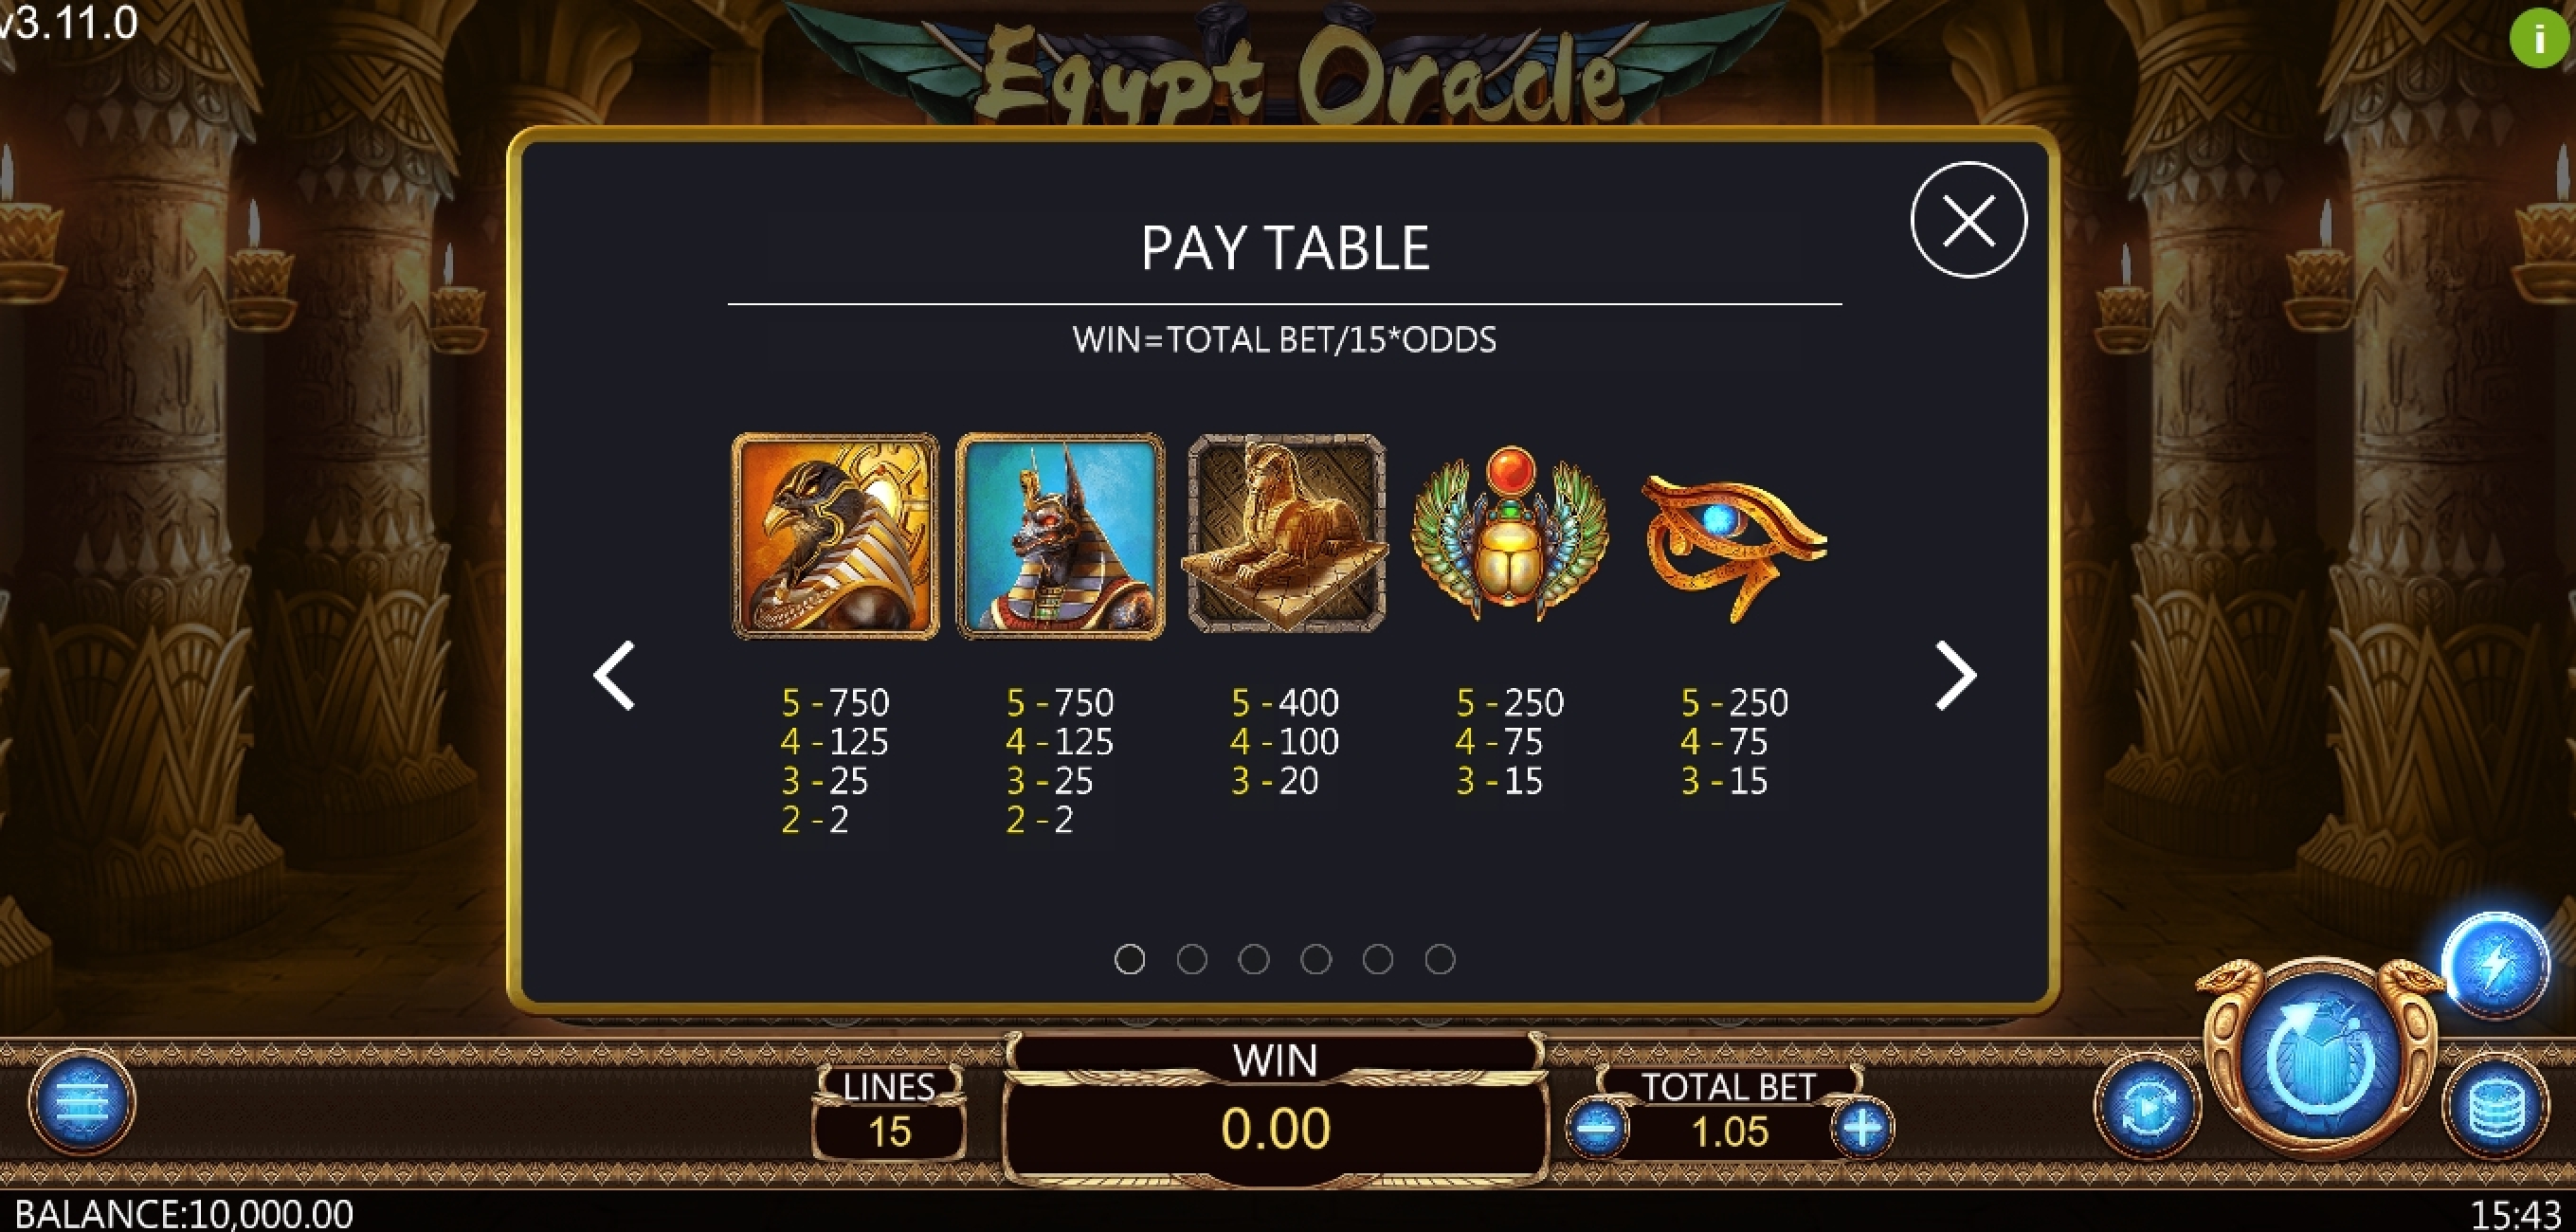 Info of Egypt Oracle Slot Game by Dragoon Soft